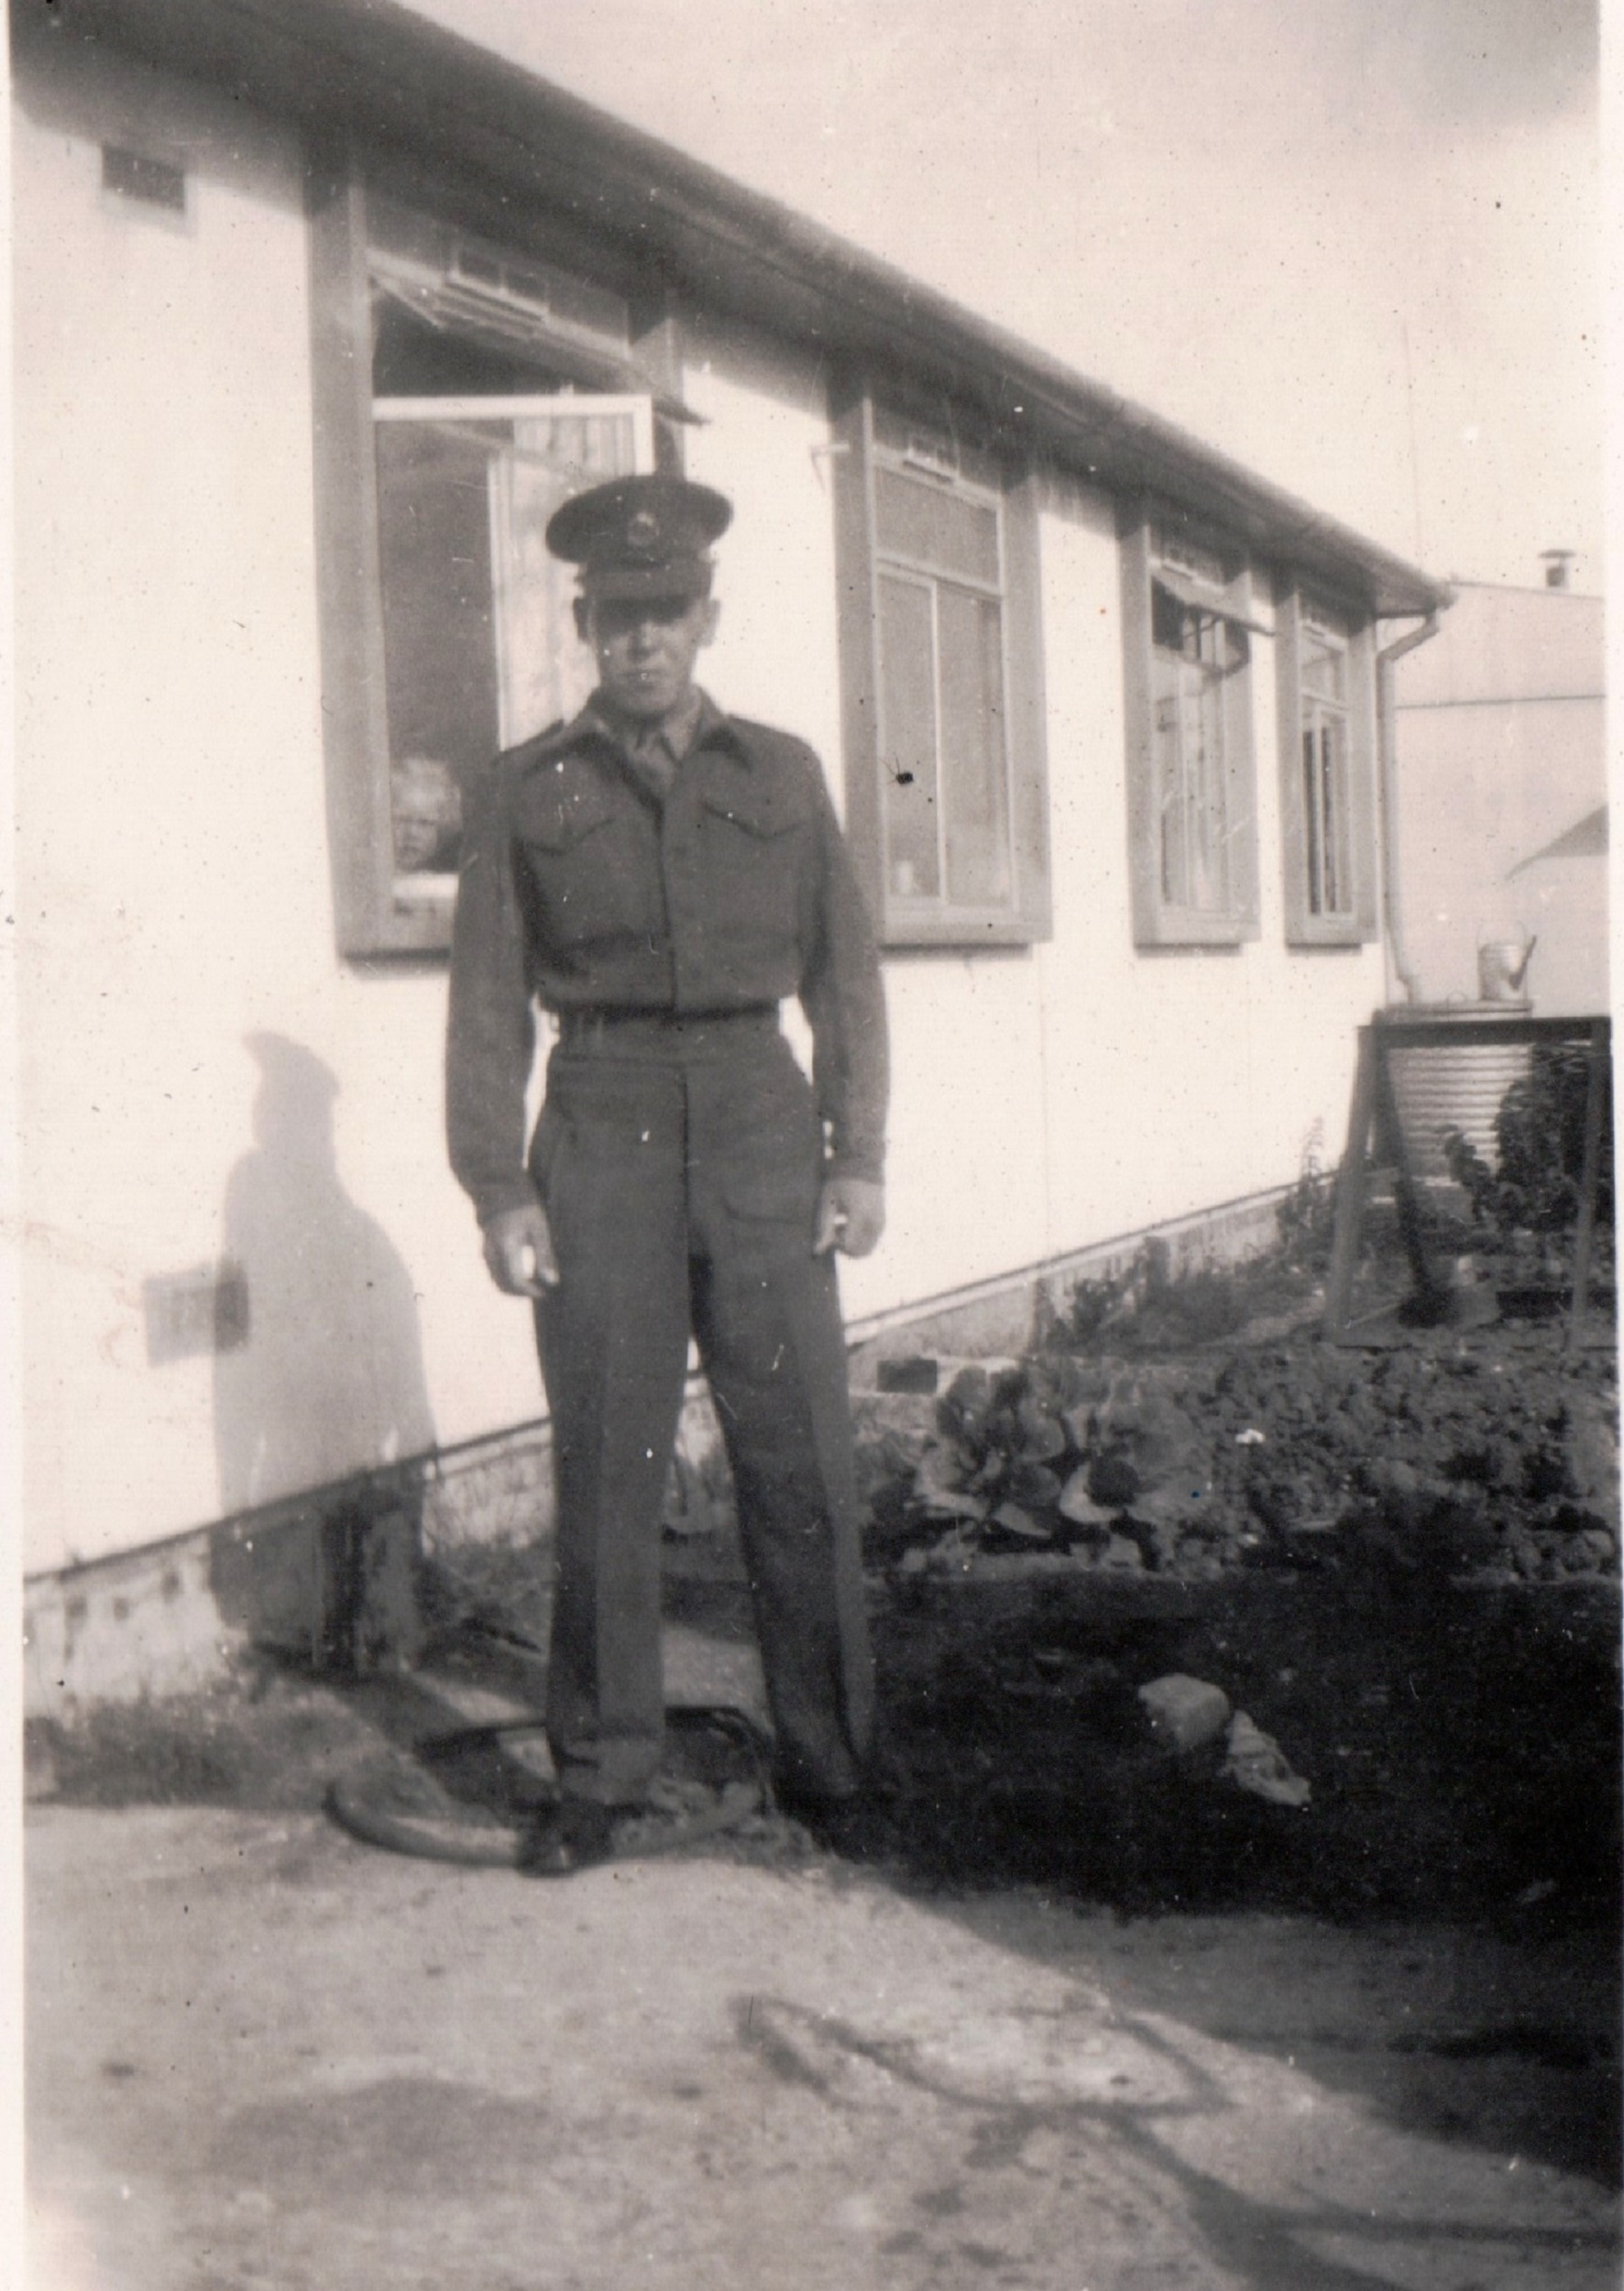 My father, George Arnold, visiting home on National Service. He was in the Royal Military Police 1947-1949. 13 Mill Close, Ringmer